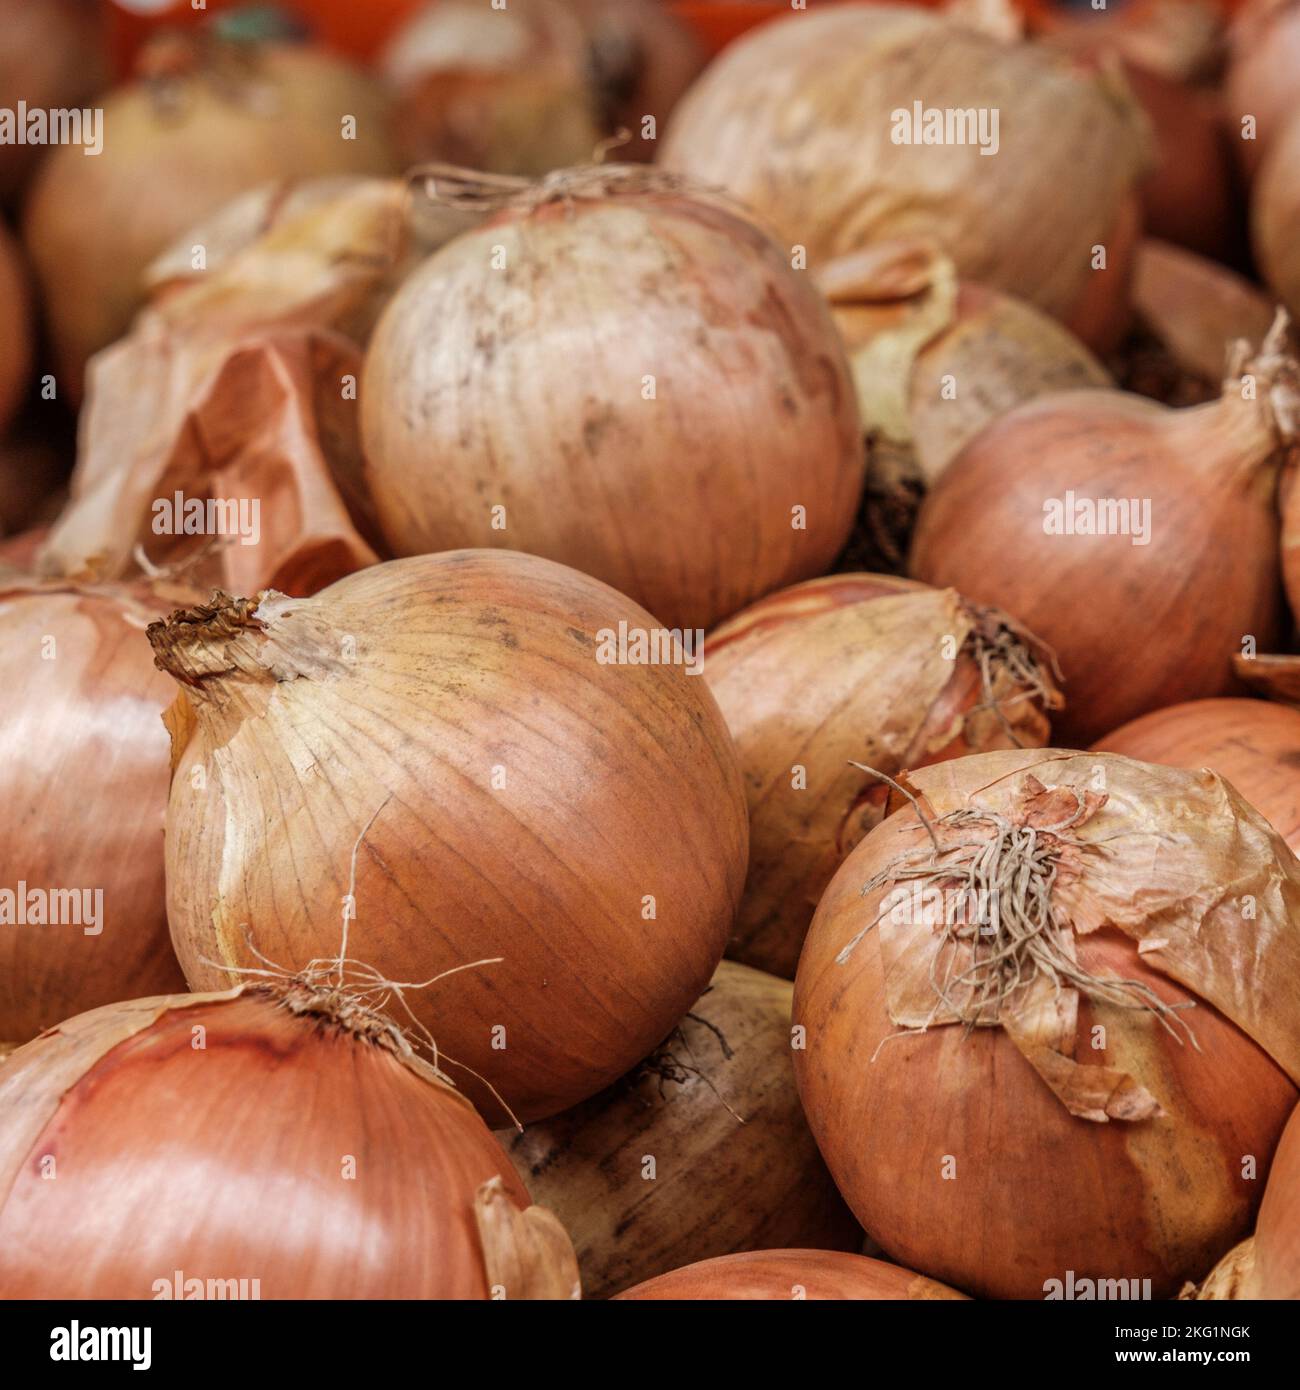 Epsom, Surrey, London UK, November 19 2022, Pile Or Stack Of Whole Raw Uncooked White Onions With No People Stock Photo